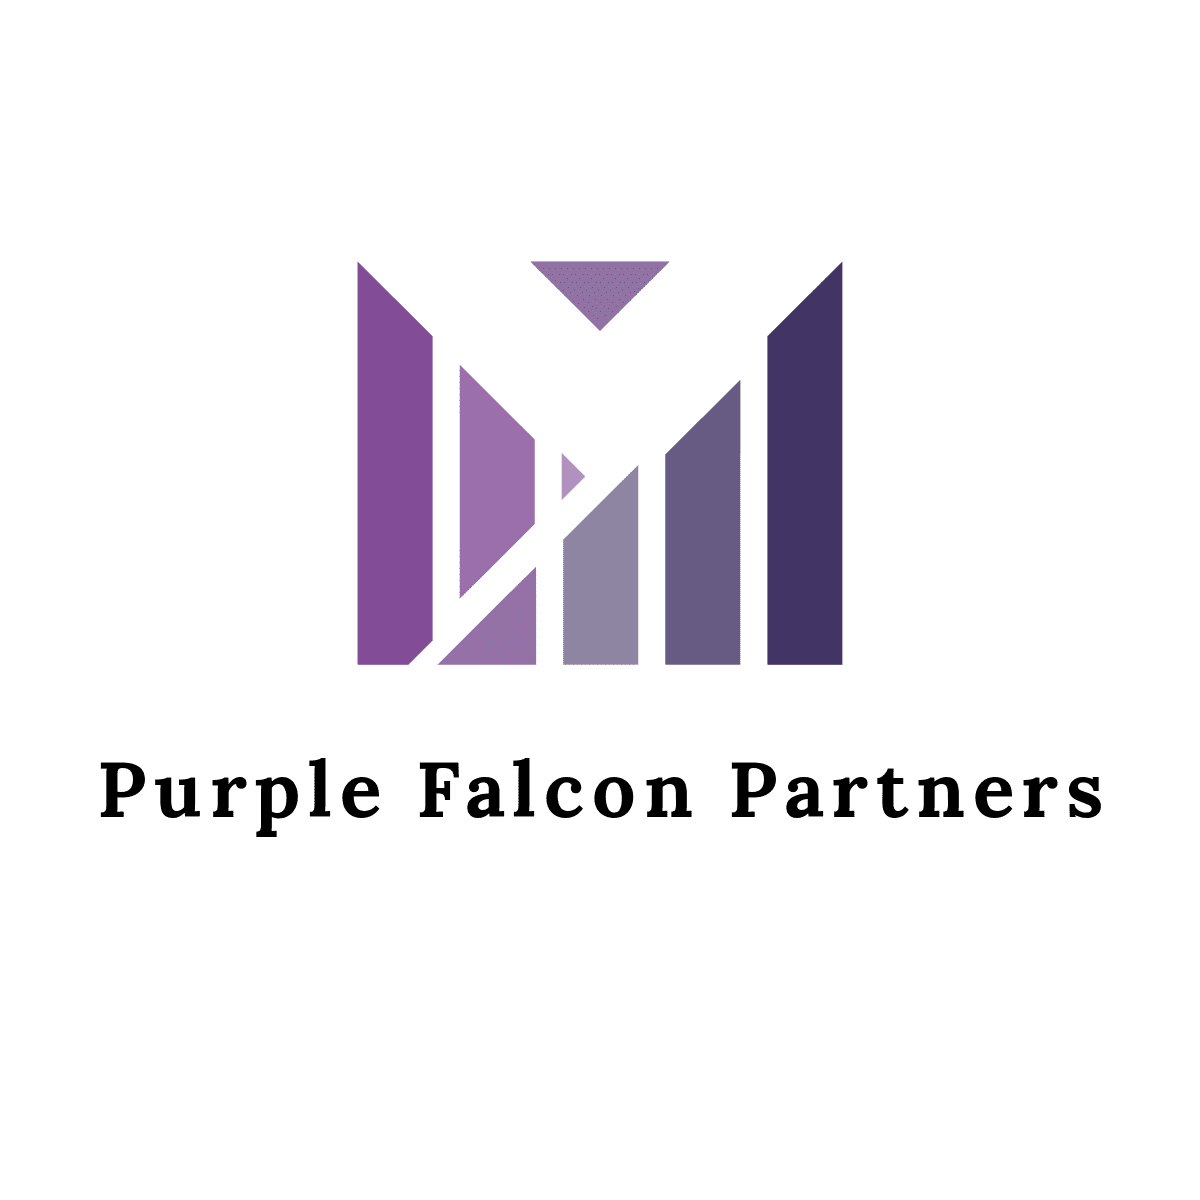 Purple Falcon Partners profile on Qualified.One